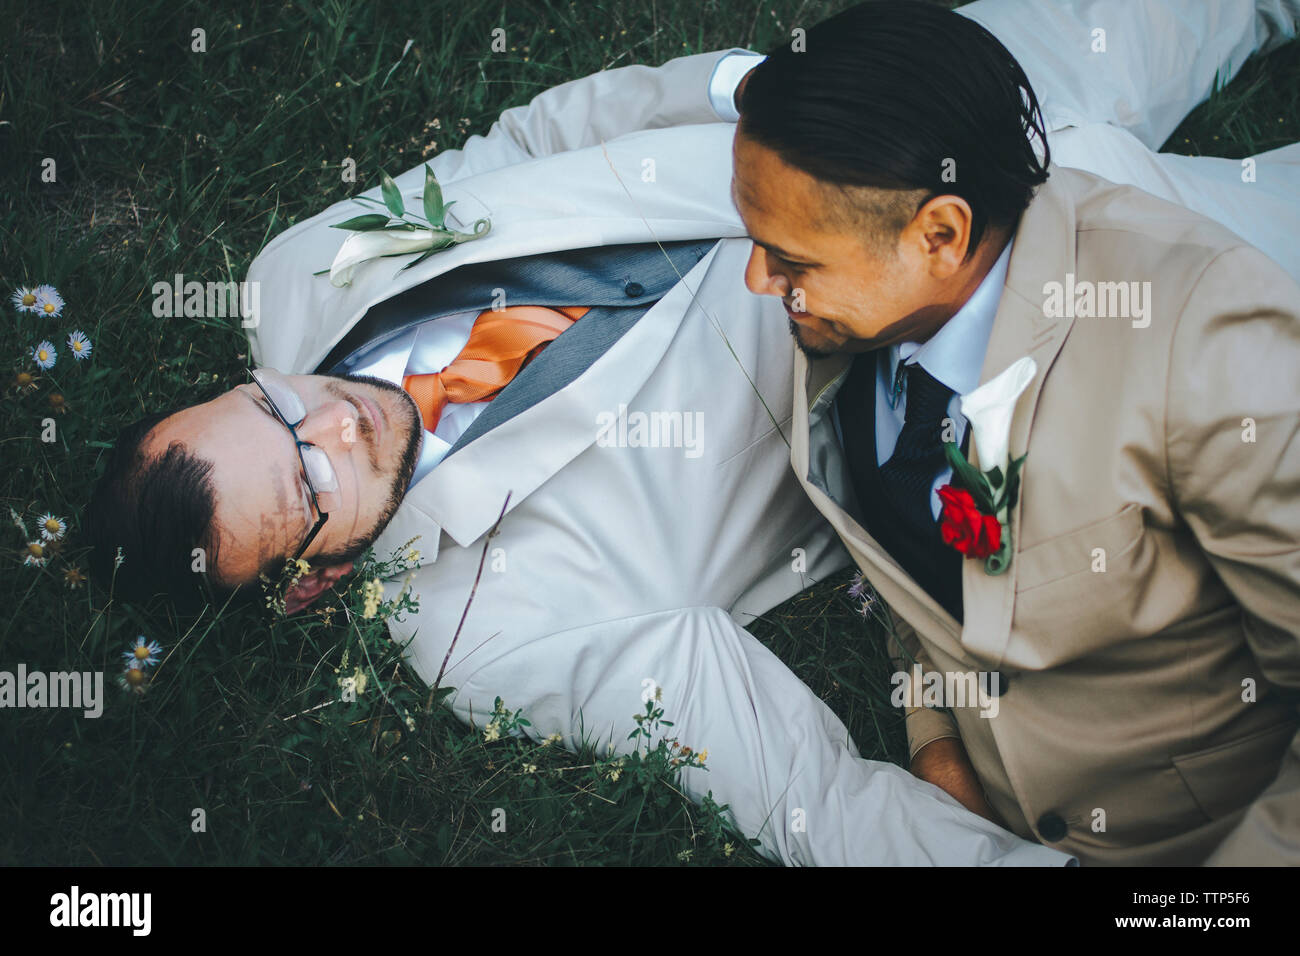 Happy homosexual couple relaxing on grassy field Stock Photo